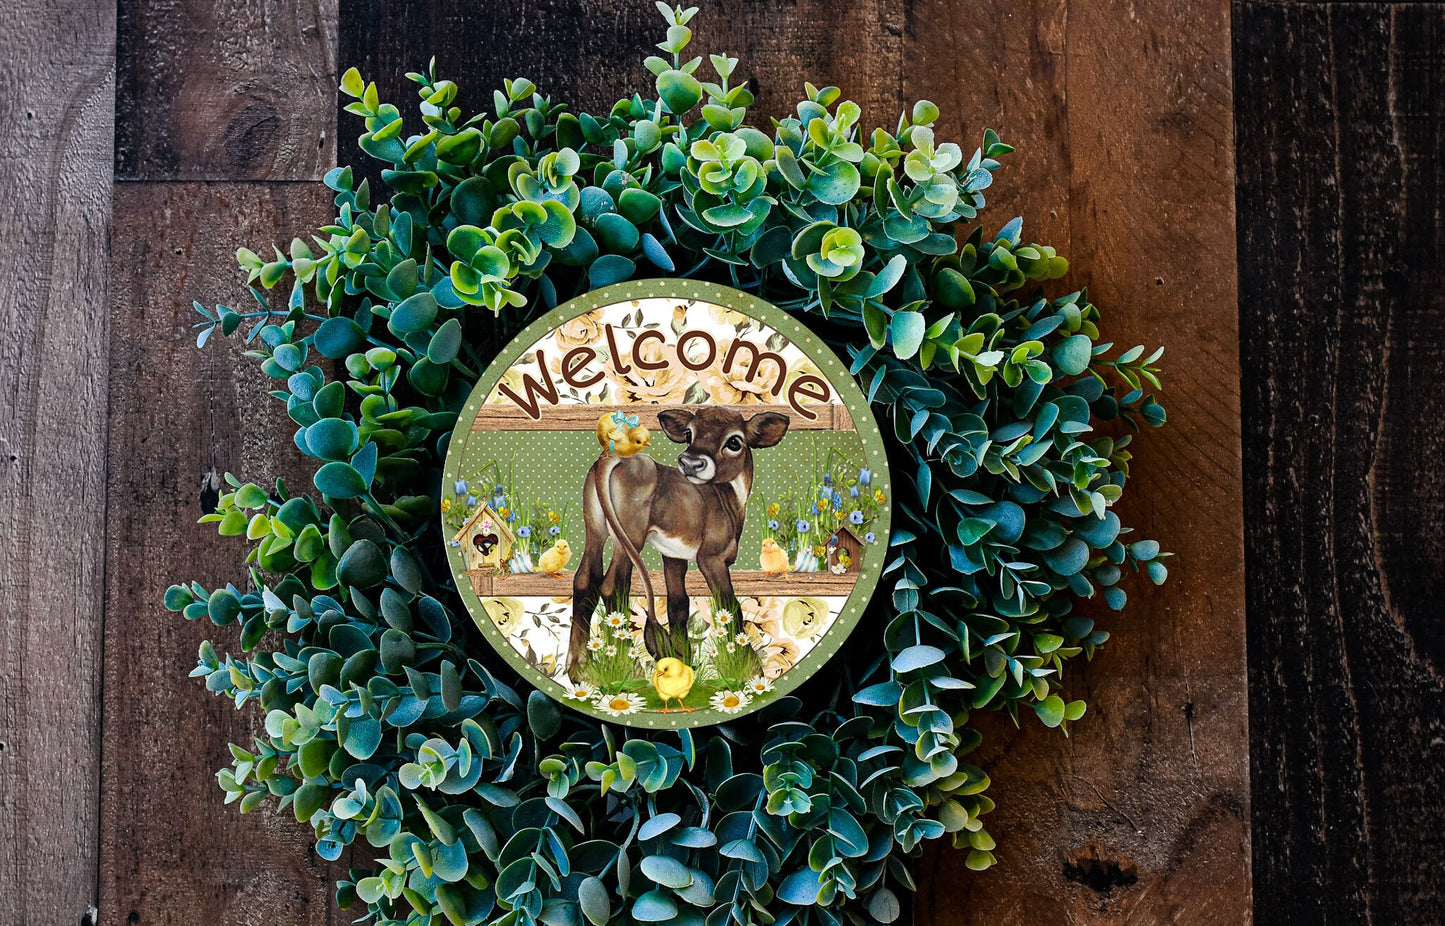 Spring Calf Welcome Round Printed Handmade Wood Sign